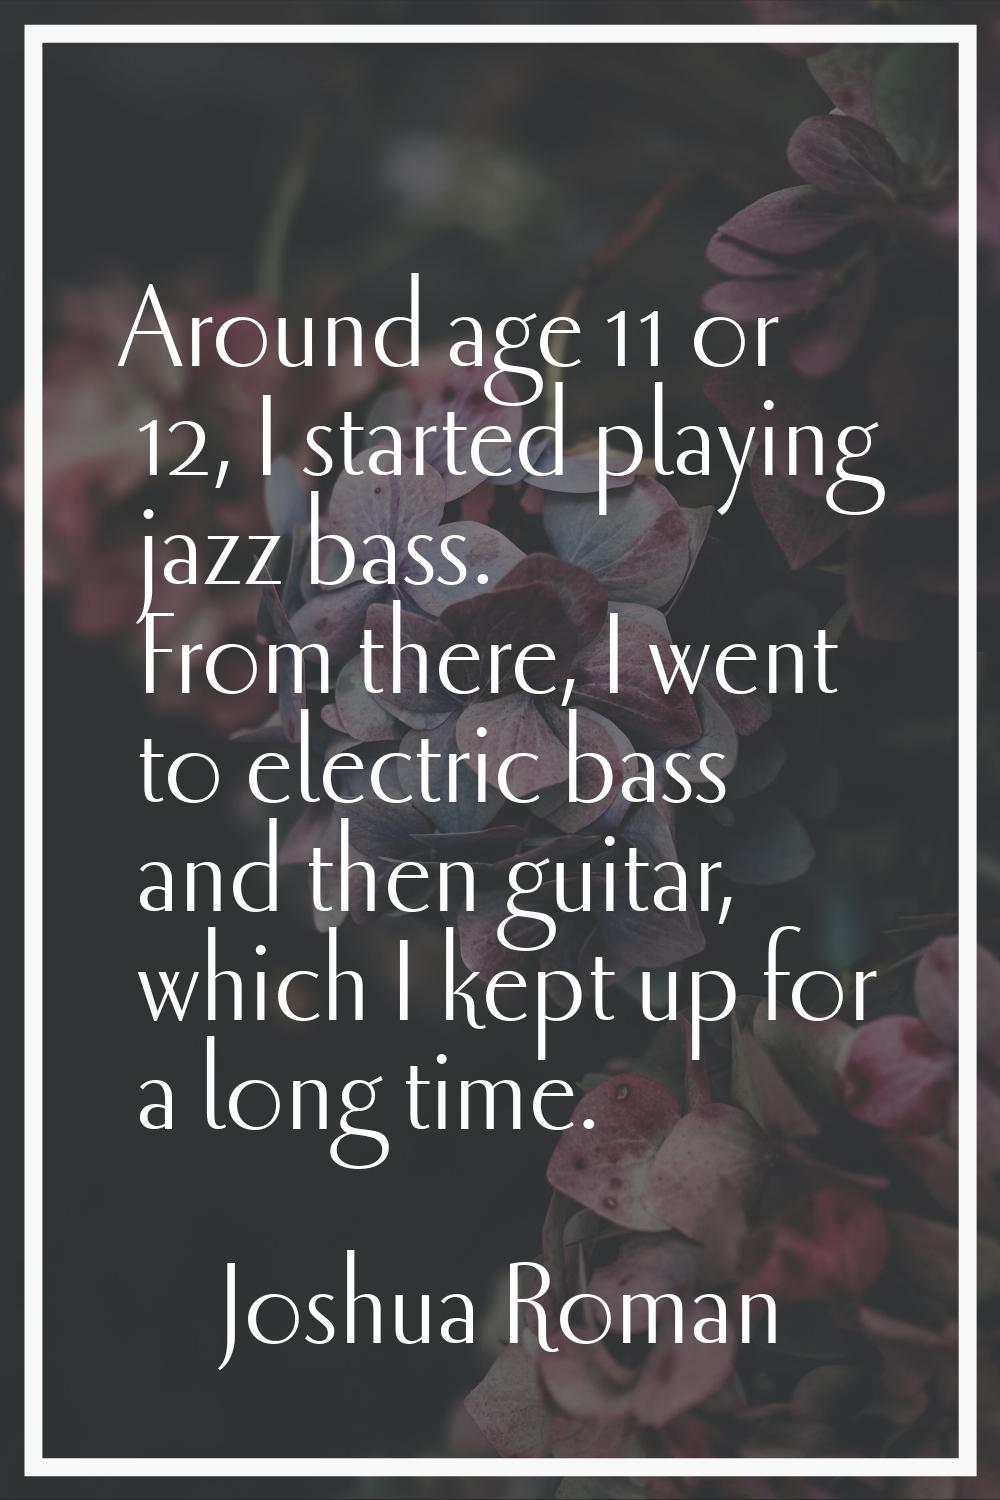 Around age 11 or 12, I started playing jazz bass. From there, I went to electric bass and then guit